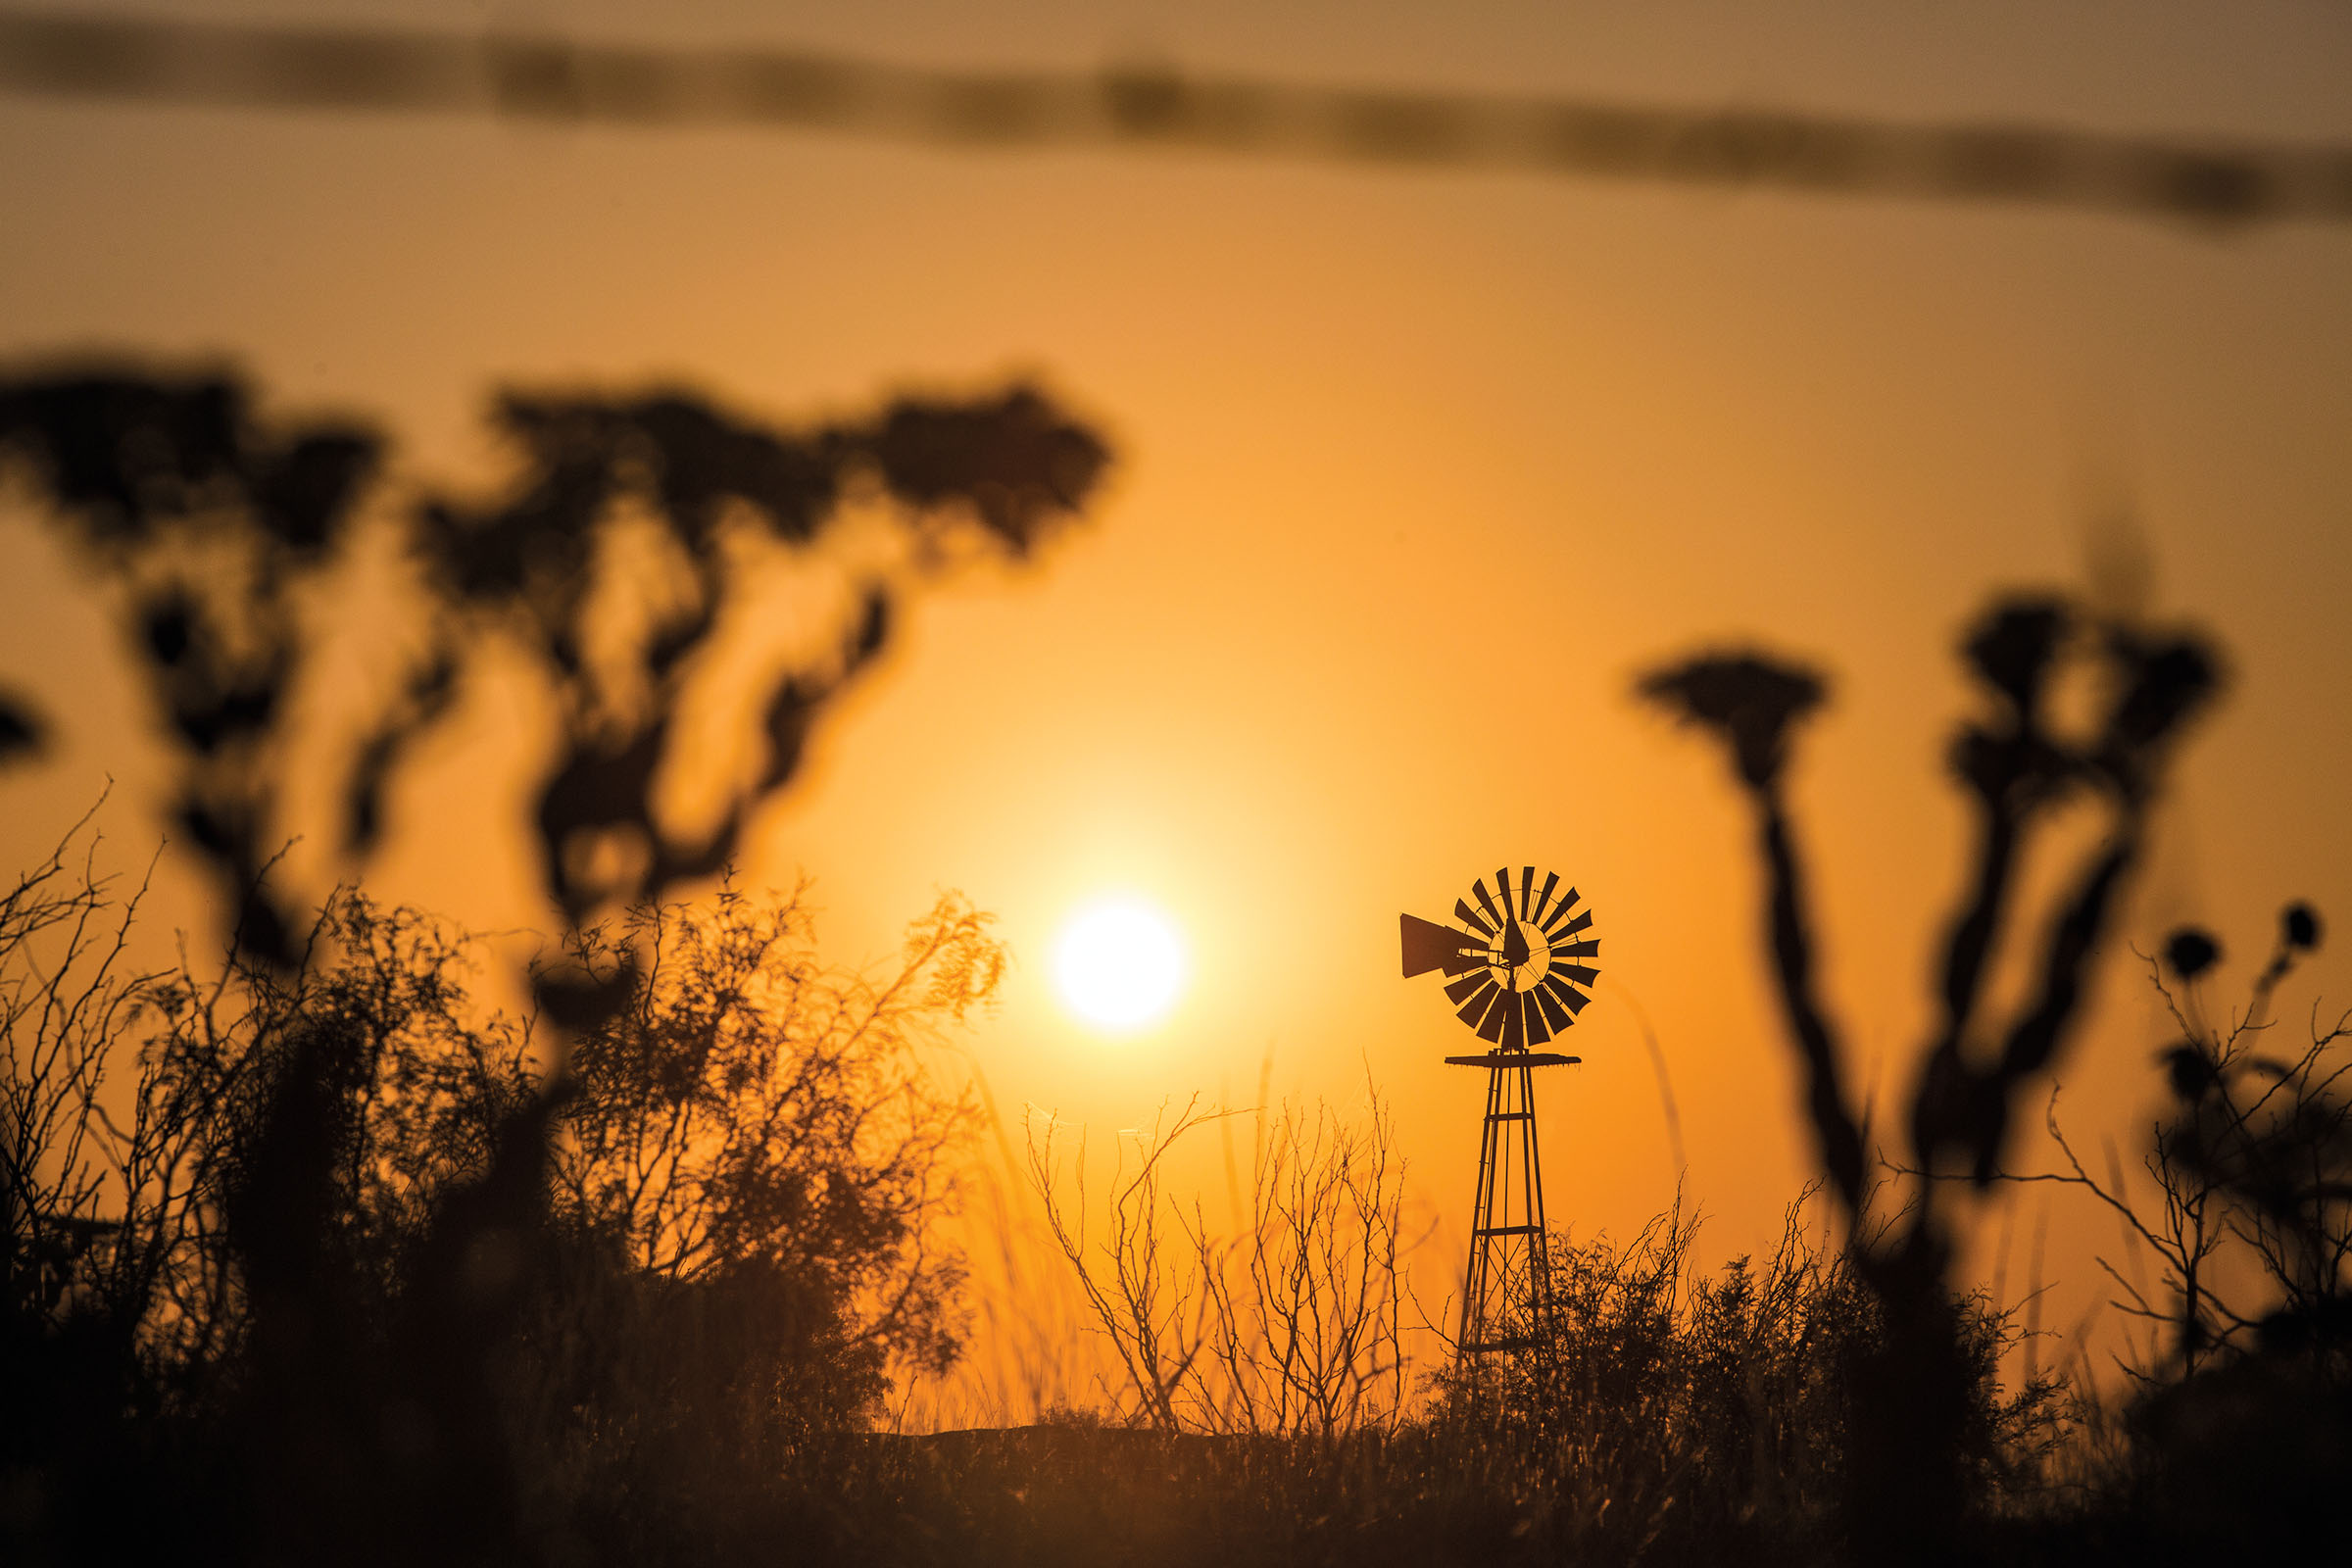 Desert plants grow alongside a tall windmill with a golden sun rising in the background